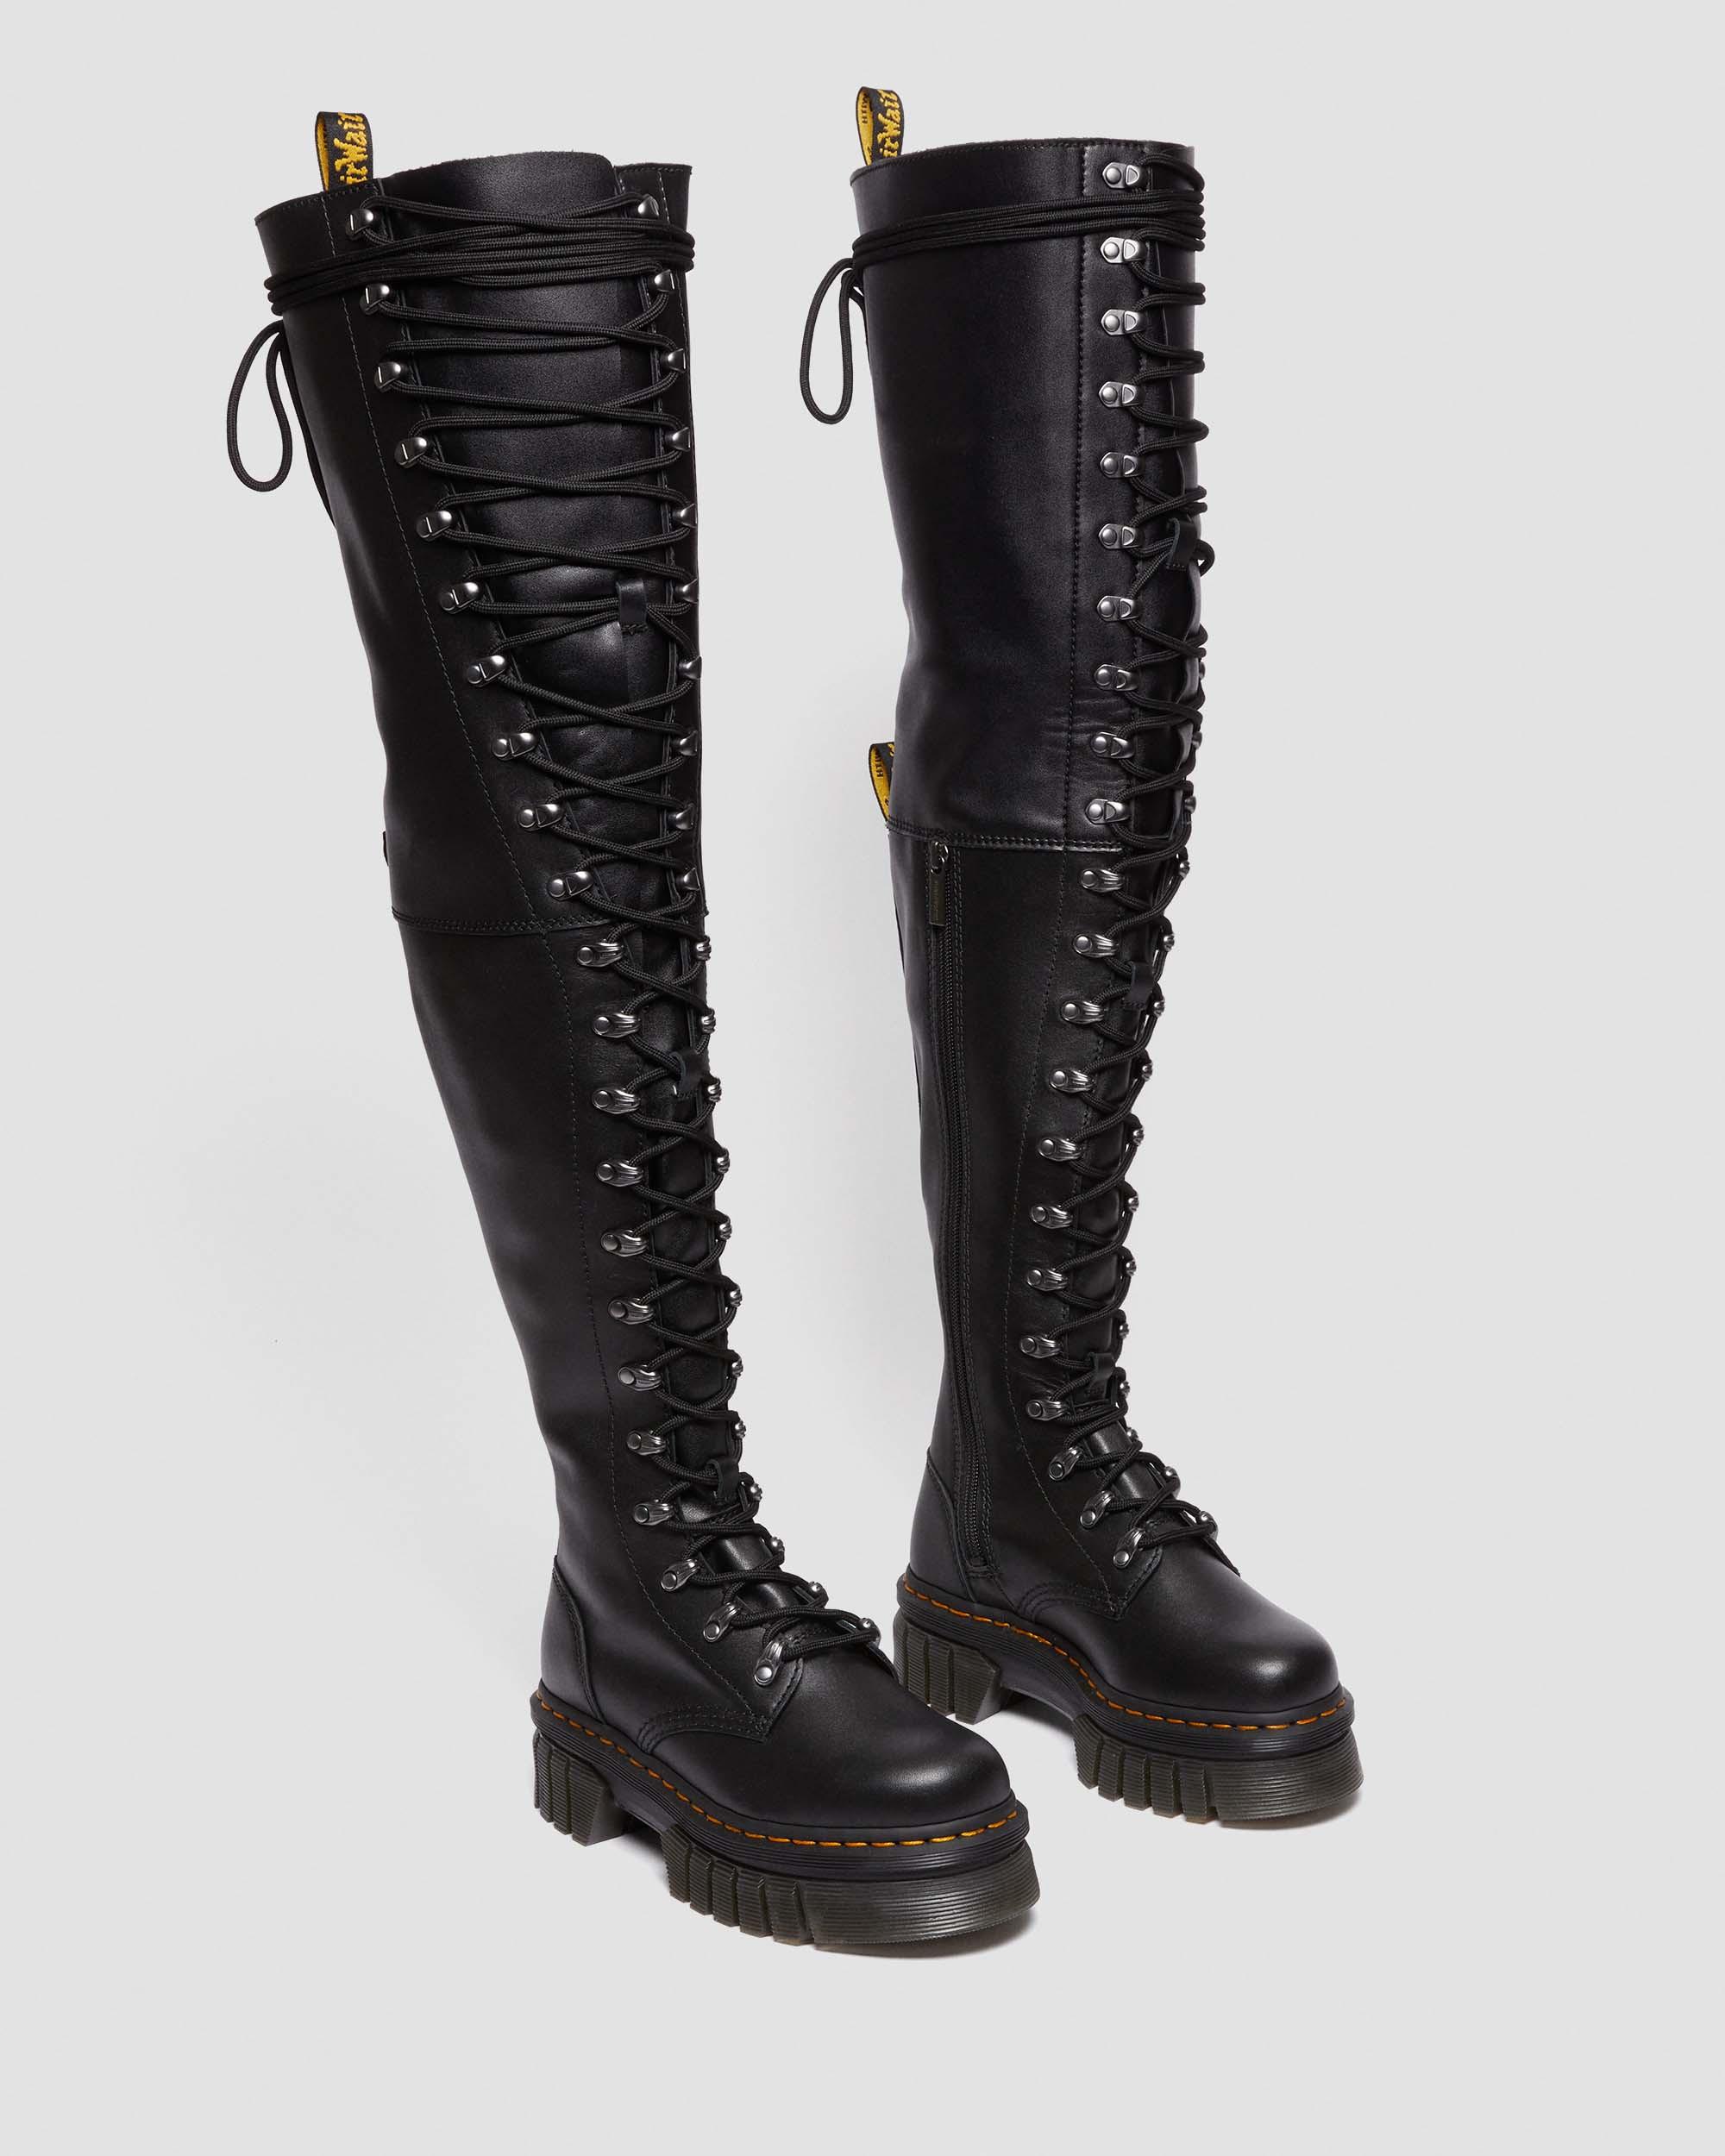 Audrick 22i XTRM Lace Leather Boots in Black | Dr. Martens